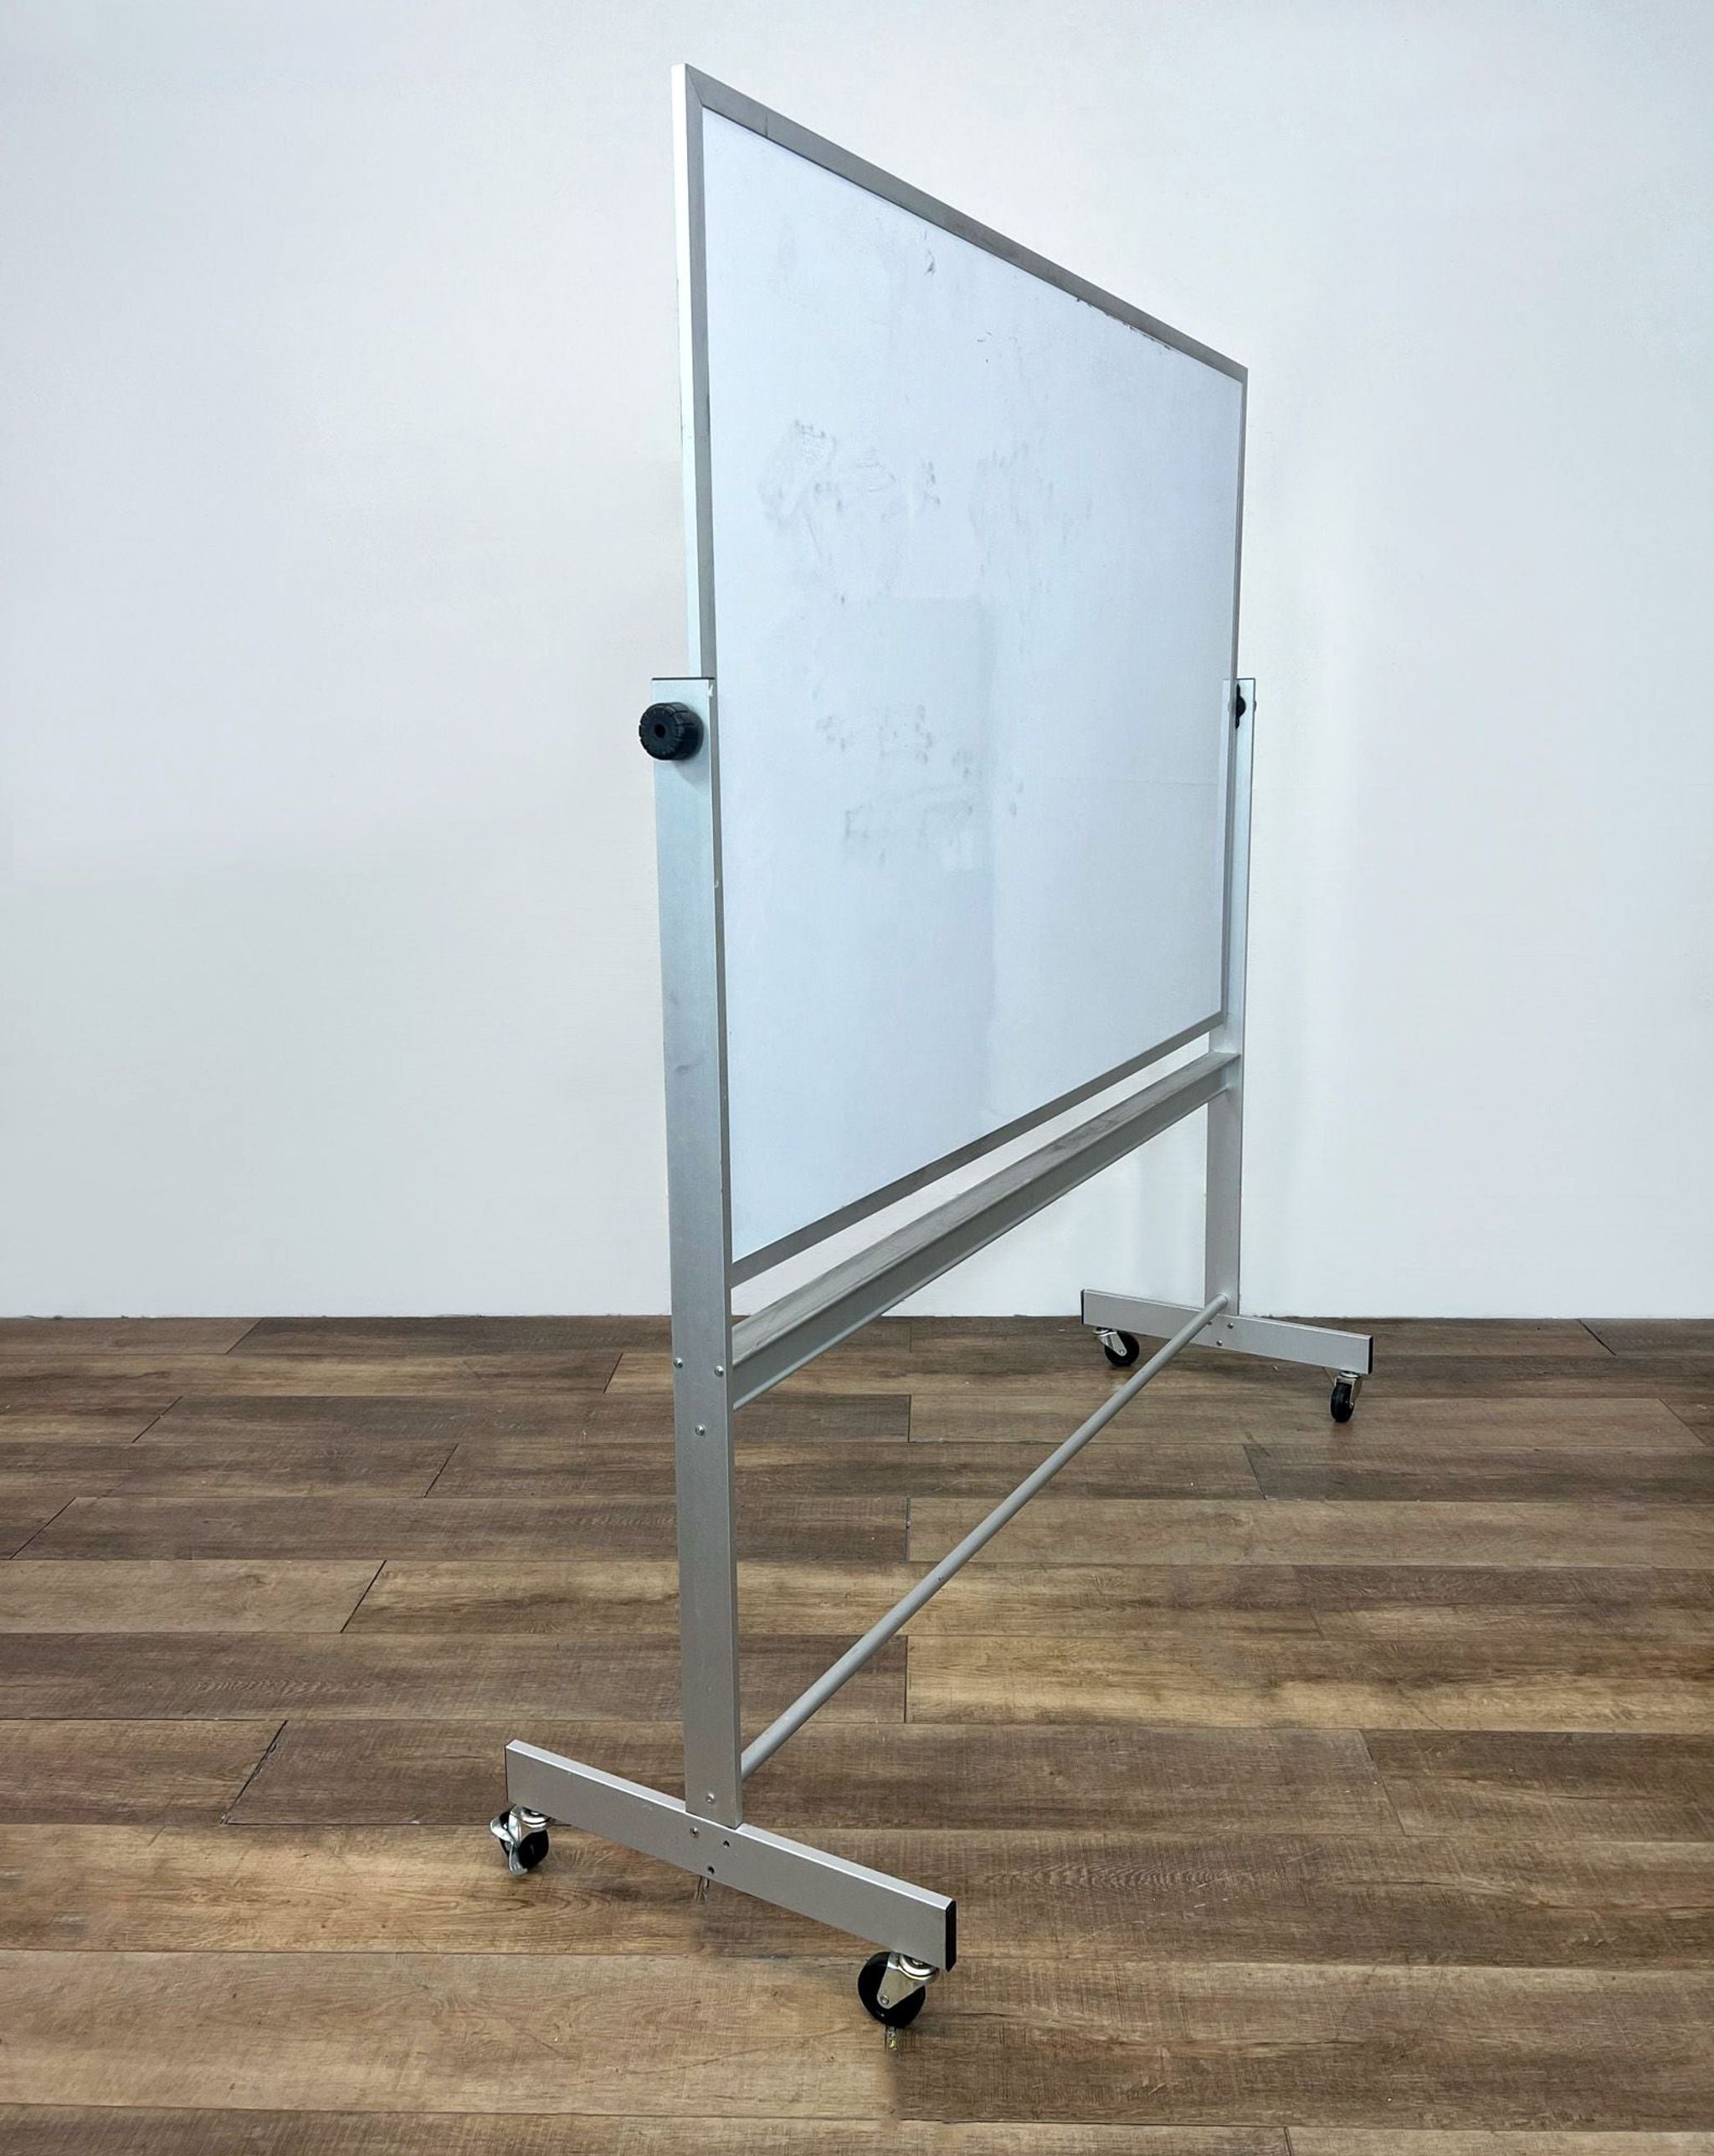 A side view of a Reperch magnetic whiteboard with a steel frame and casters on a wooden floor.